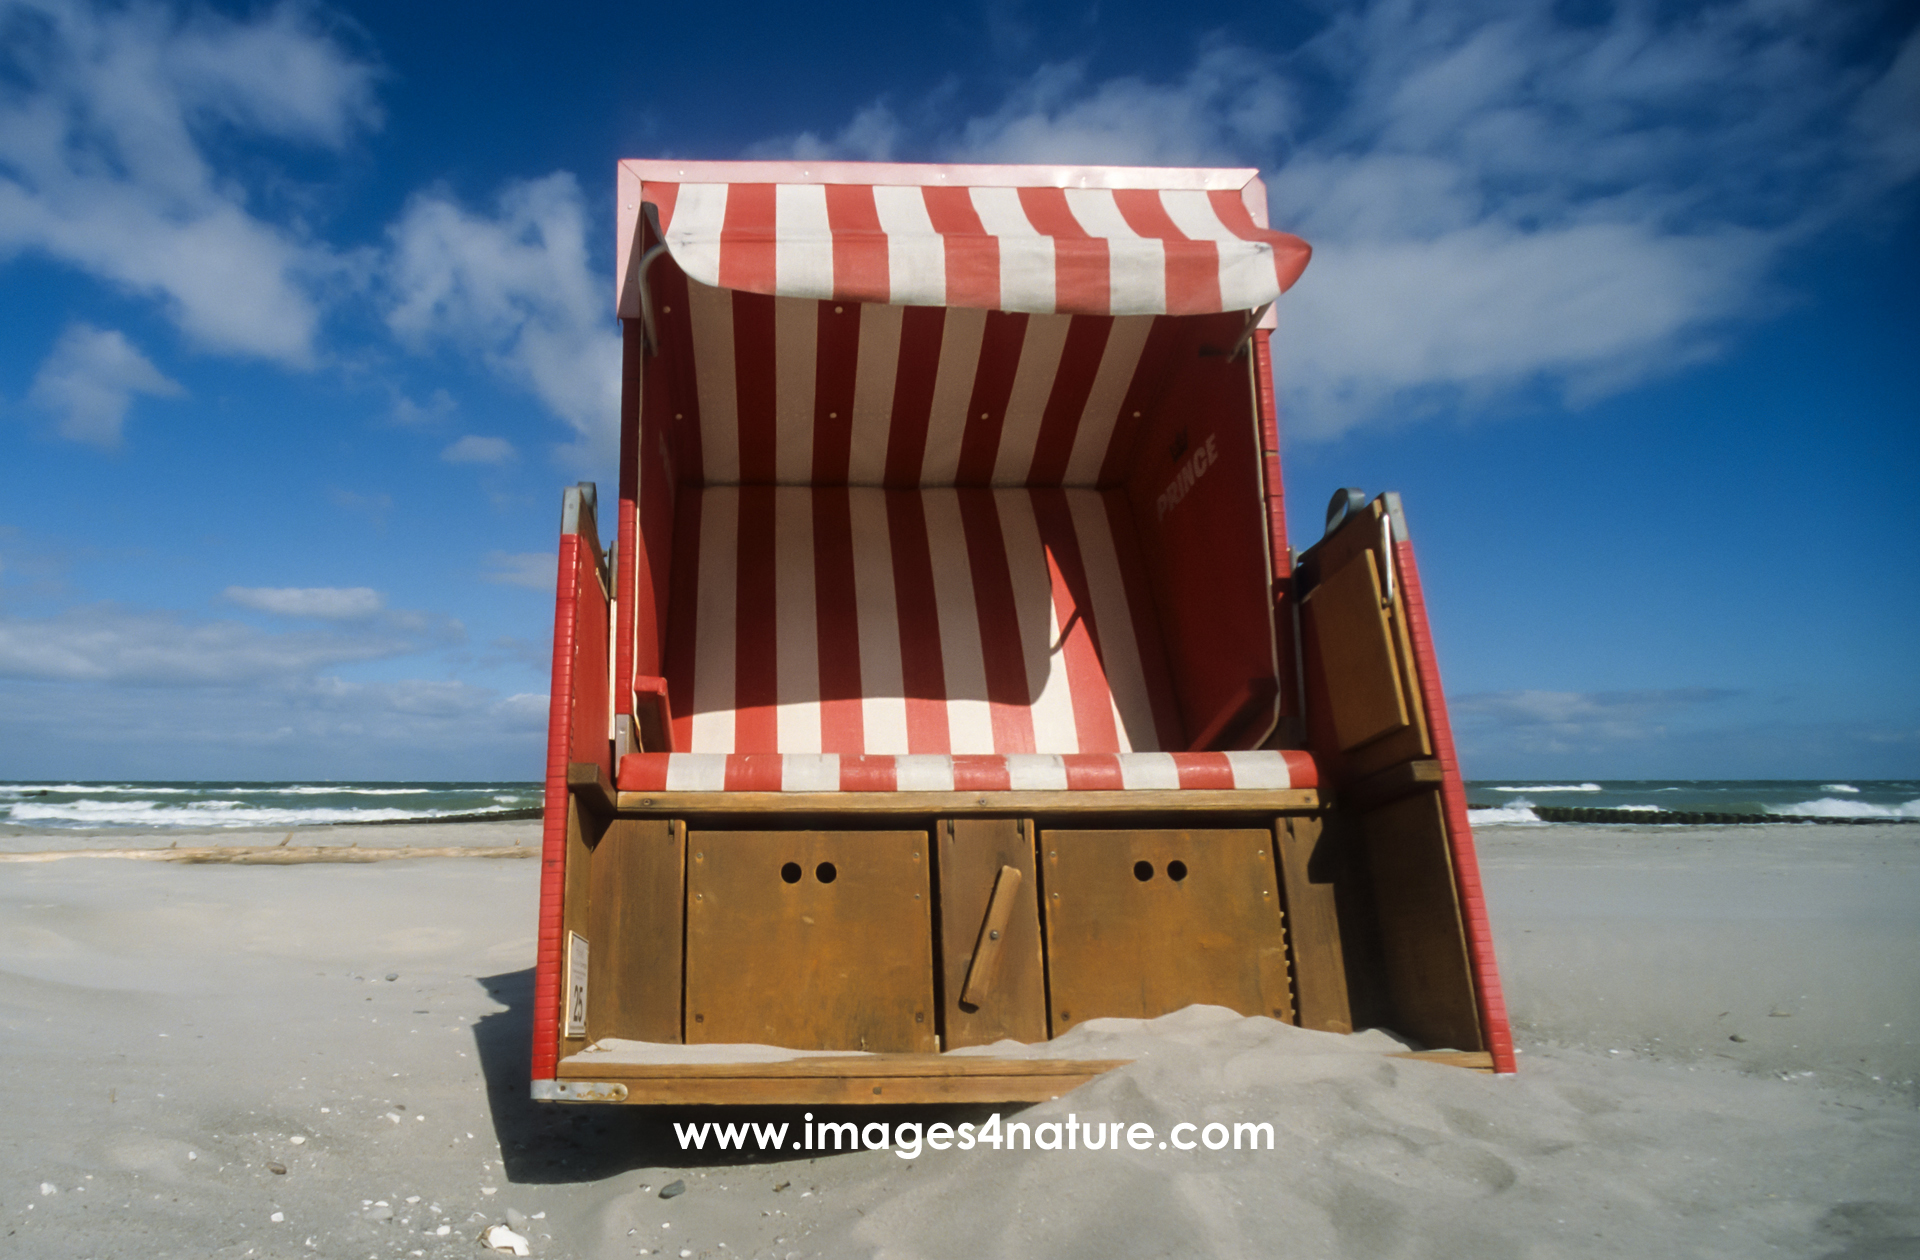 An empty basket beach chair for two people in the sand